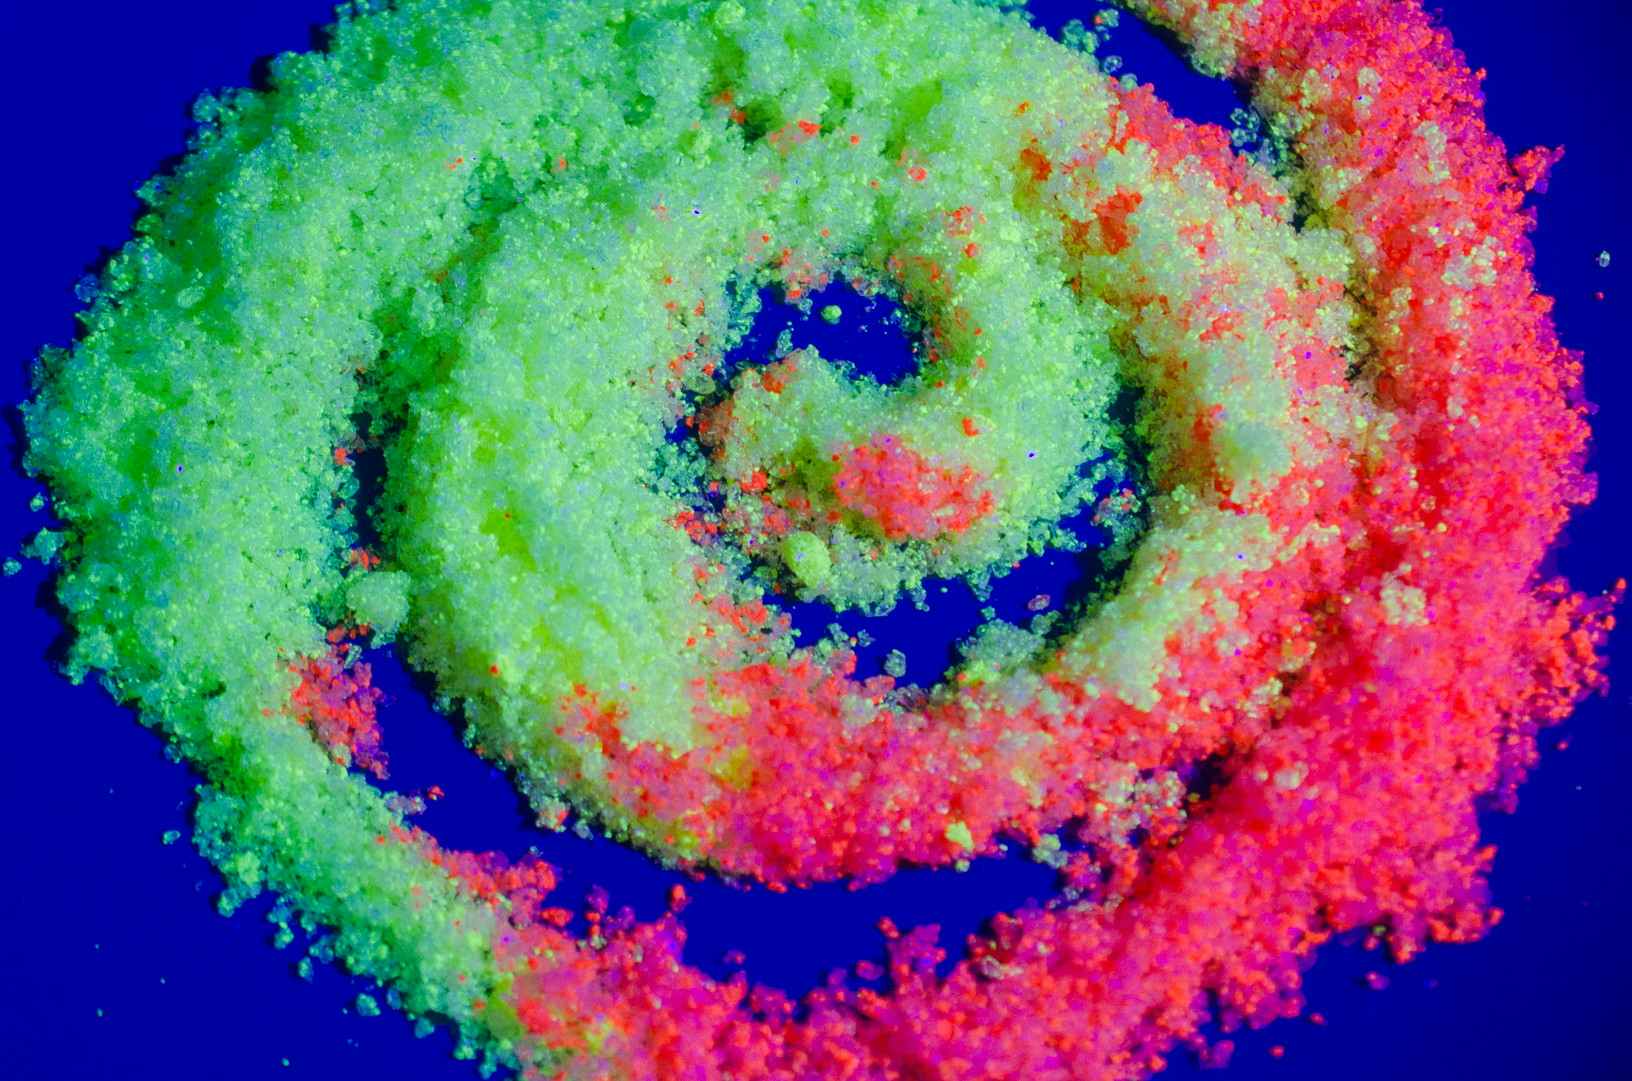 A swirl of colorful sand